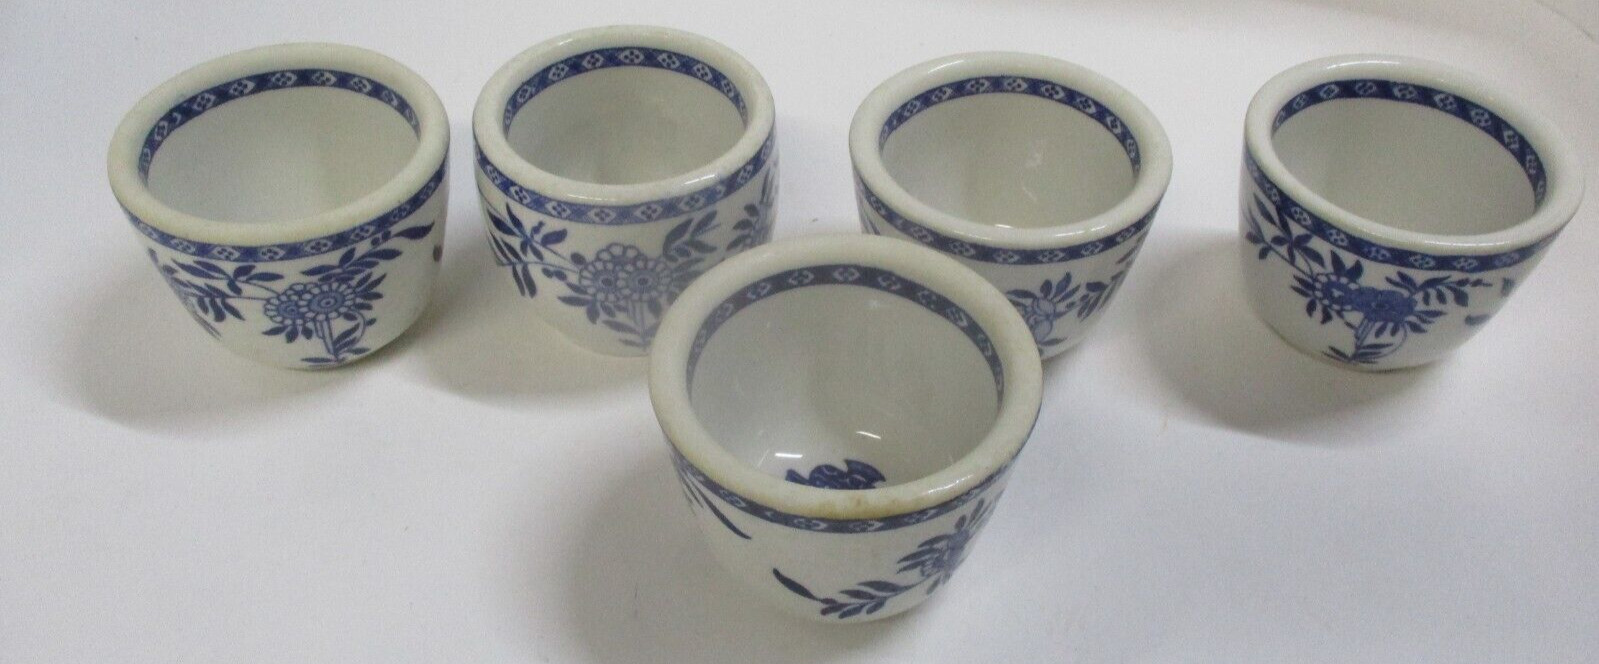 5 Vintage Small Bowls York By Sterling China U.S.A. White & Blue - Tea Cups